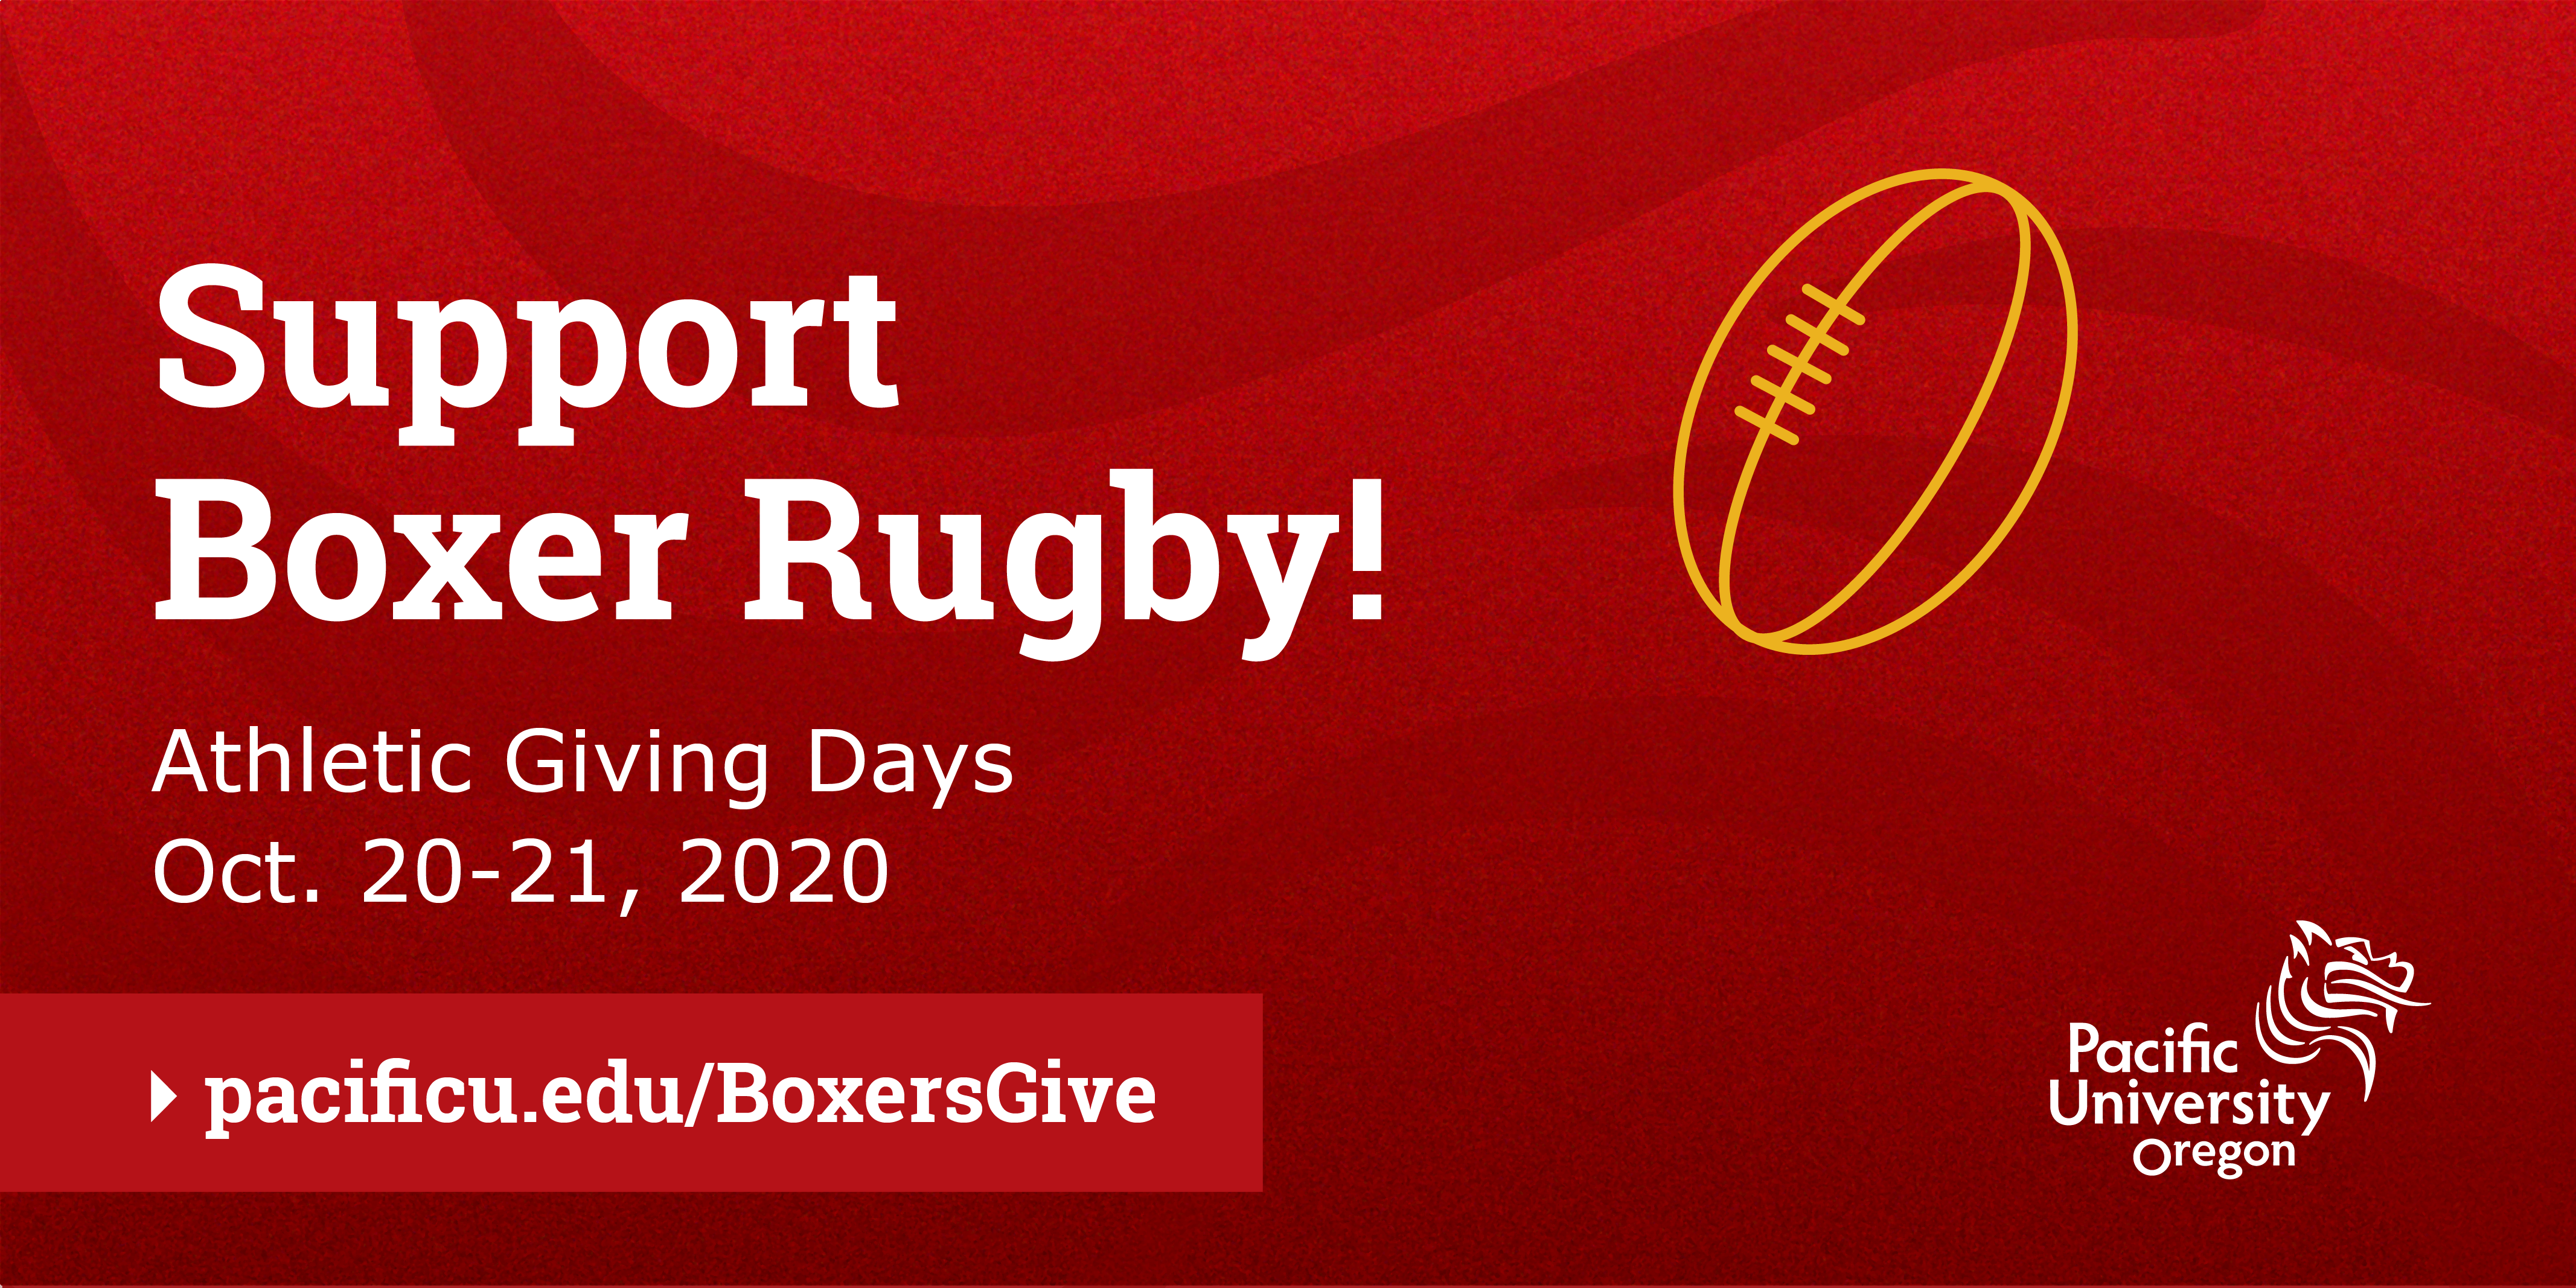 Support Boxer Rugby